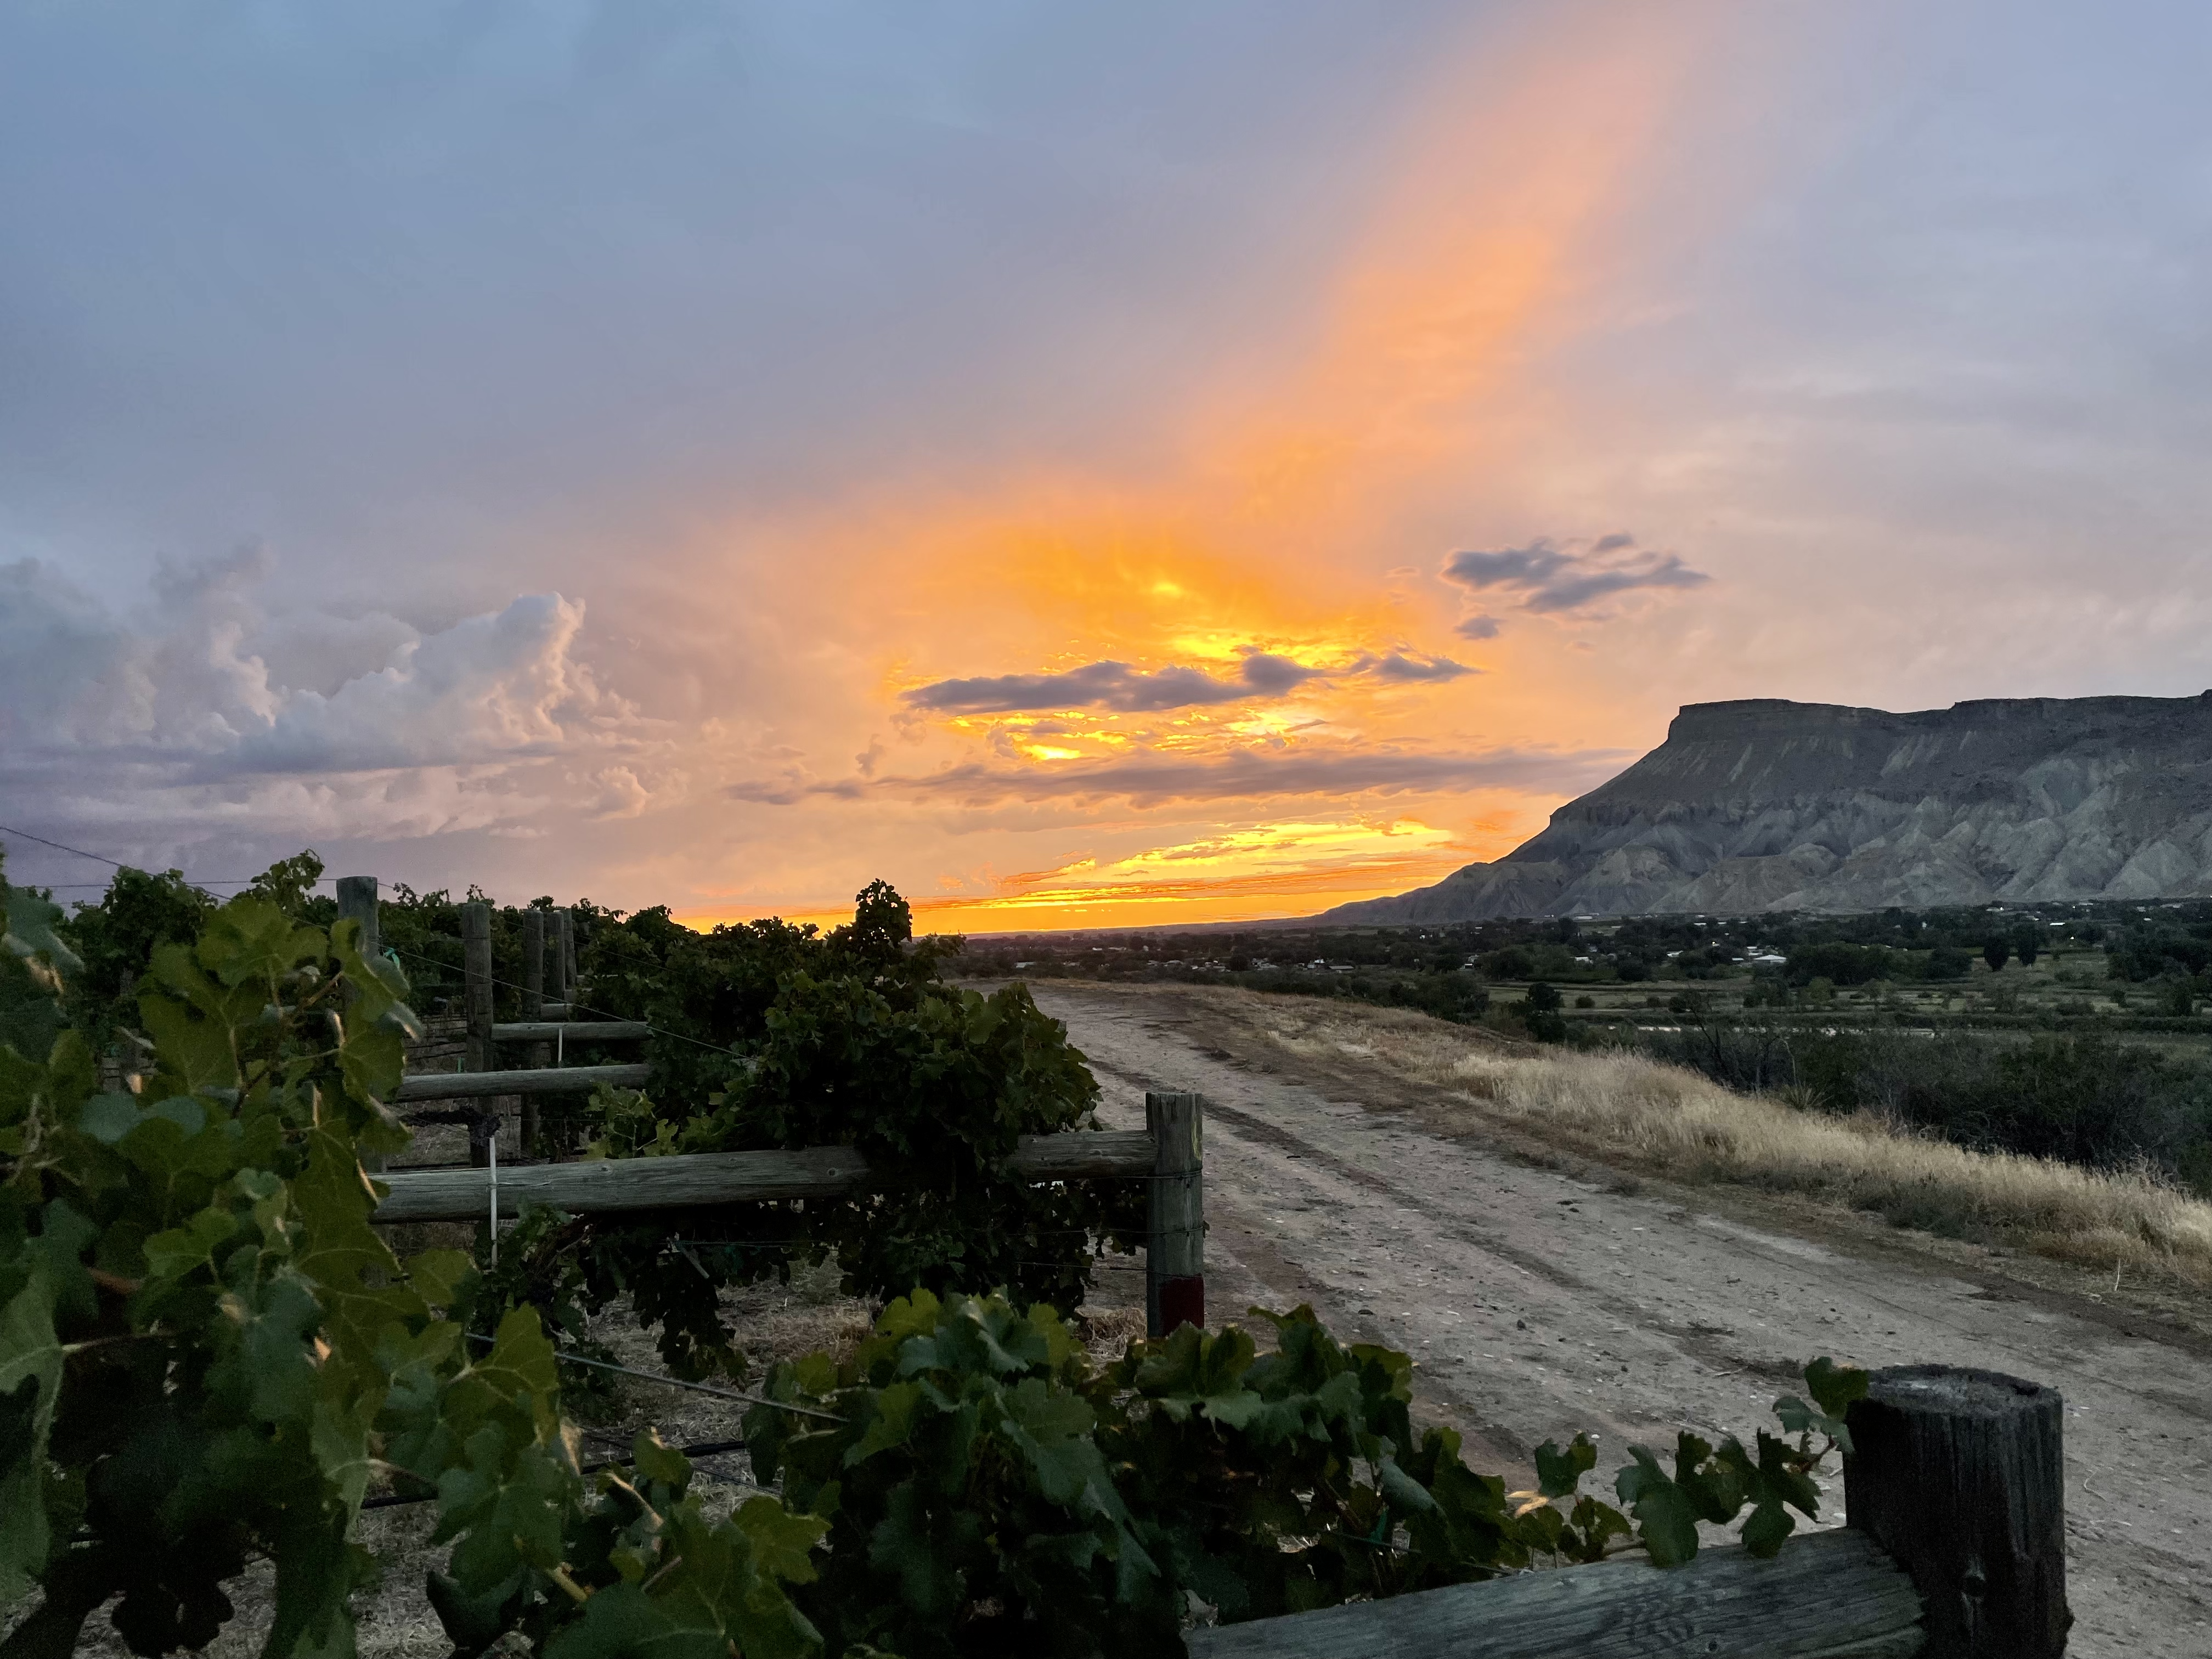 The sunset over the Talbott vineyard above the Colorado River in Palisade. 